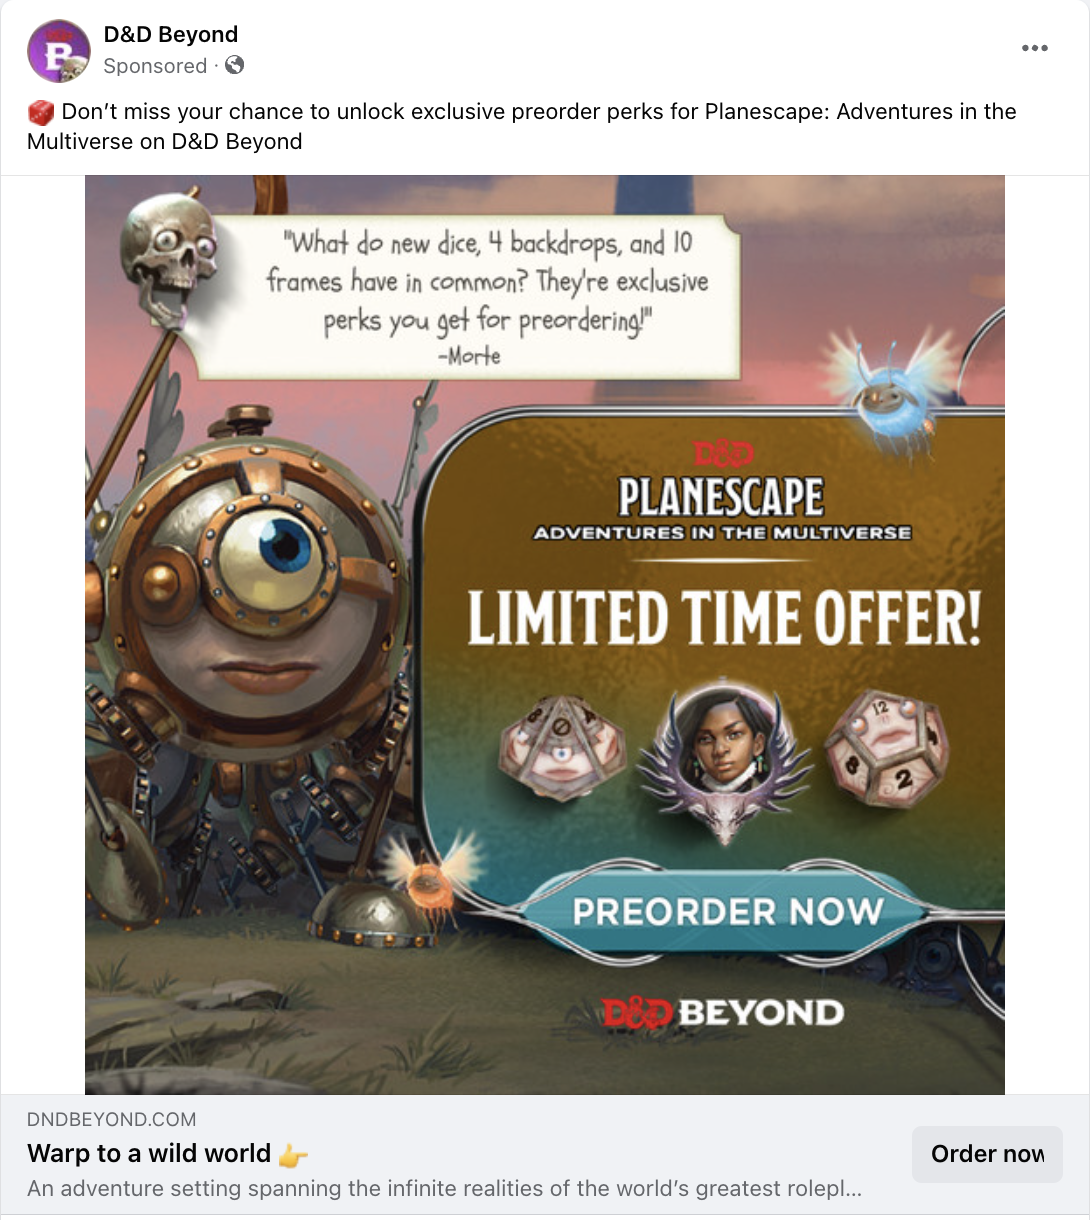 Social retargeting ad from D&D beyond